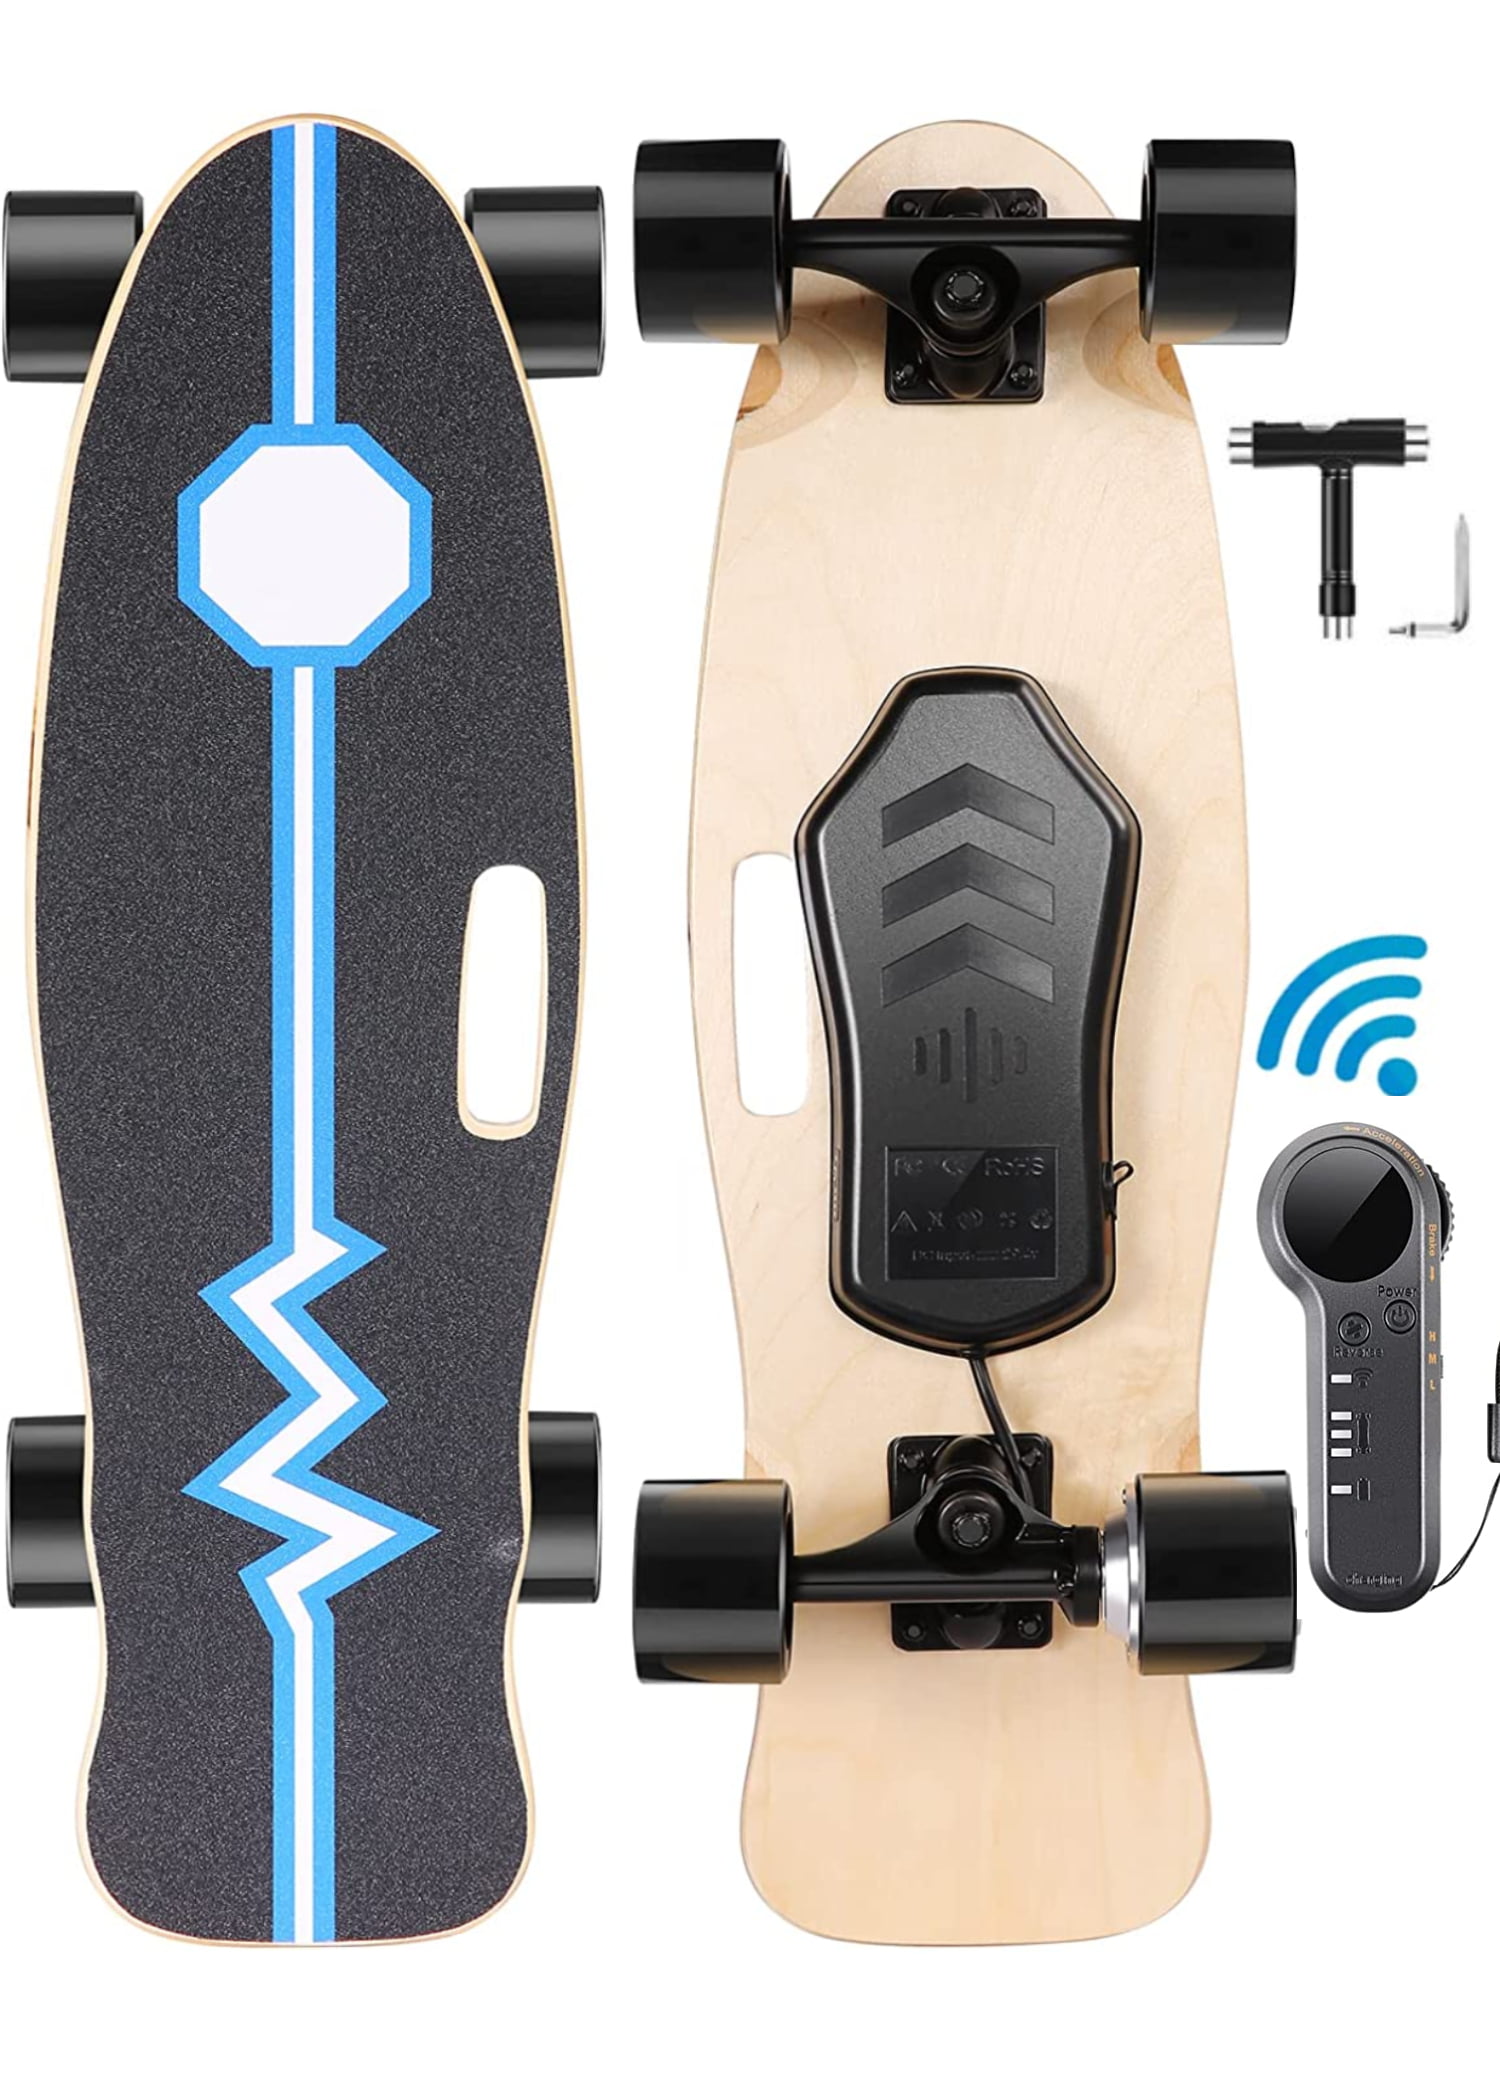 7 Best Razor Electric Skateboards Compare Prices Features More 4397